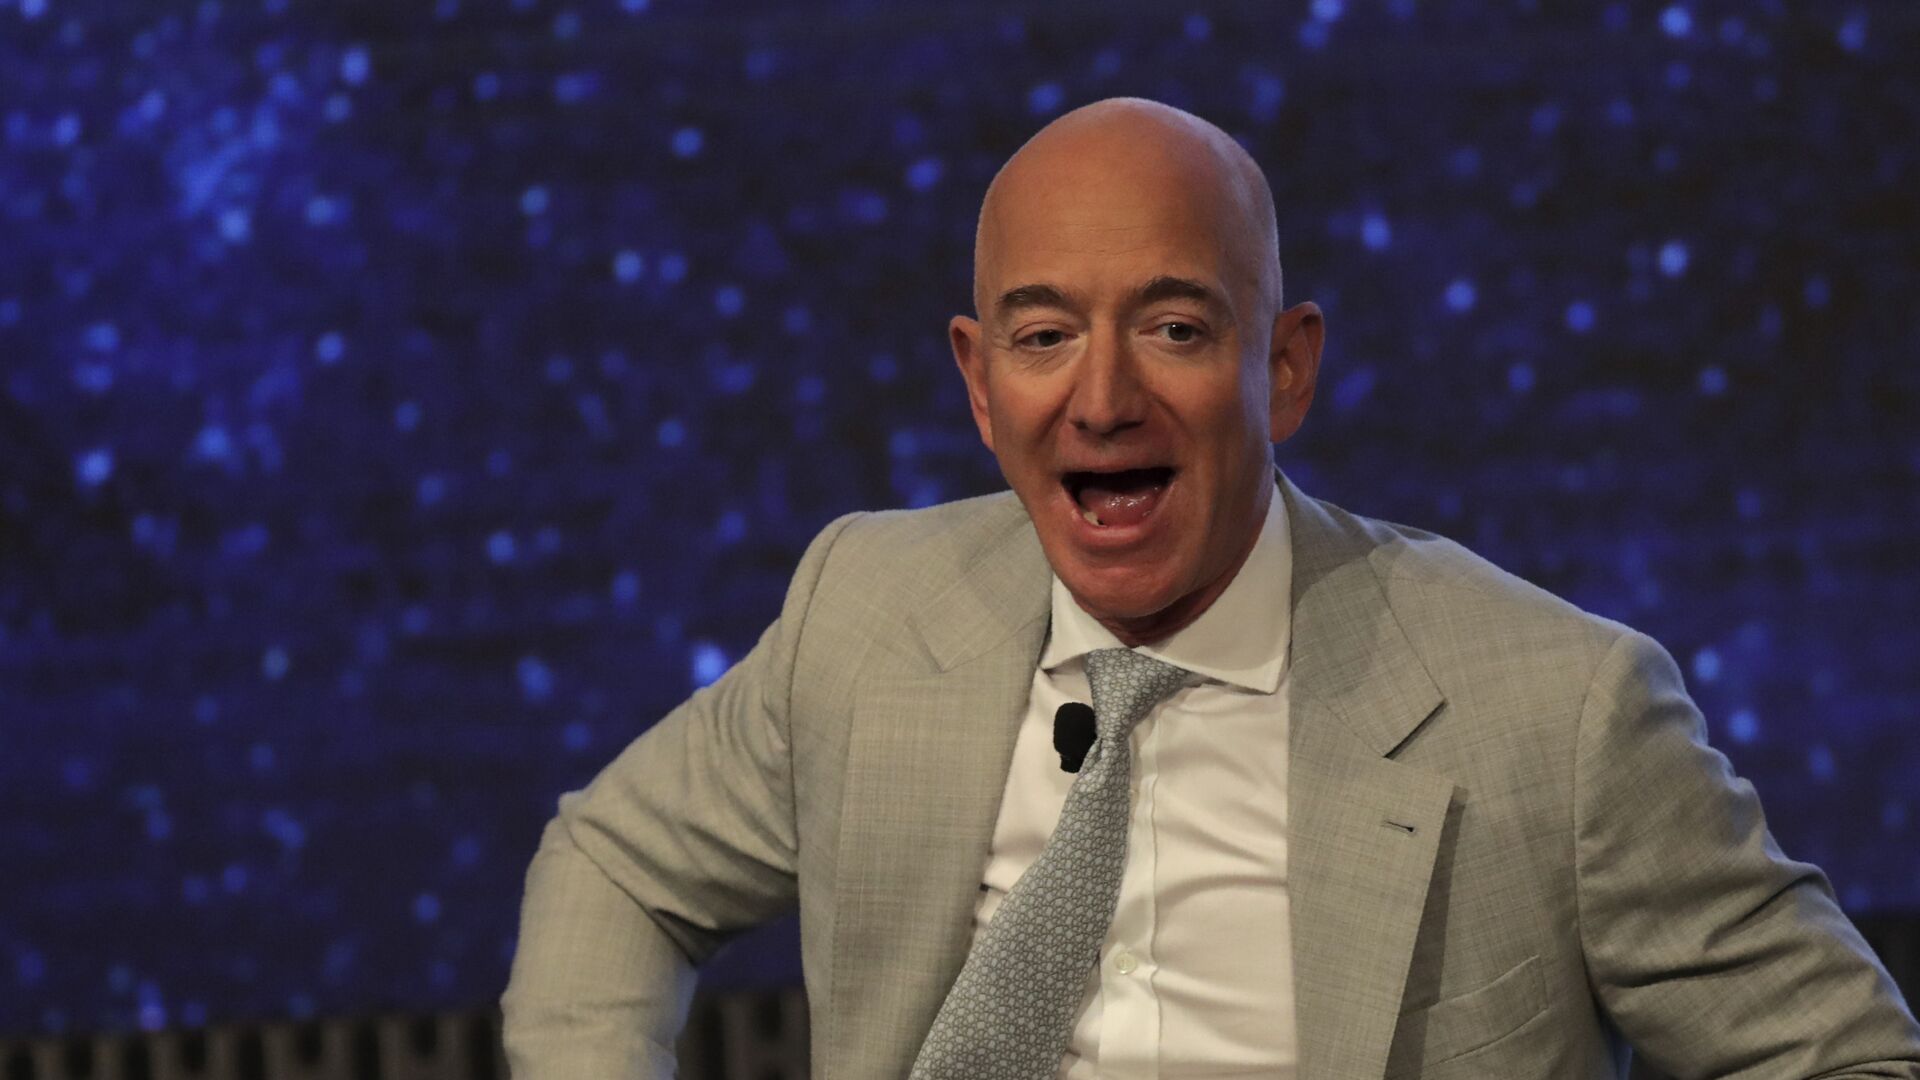 Amazon founder Jeff Bezos during the JFK Space Summit at the John F. Kennedy Presidential Library in Boston, Wednesday, June 19, 2019 - Sputnik International, 1920, 26.04.2022